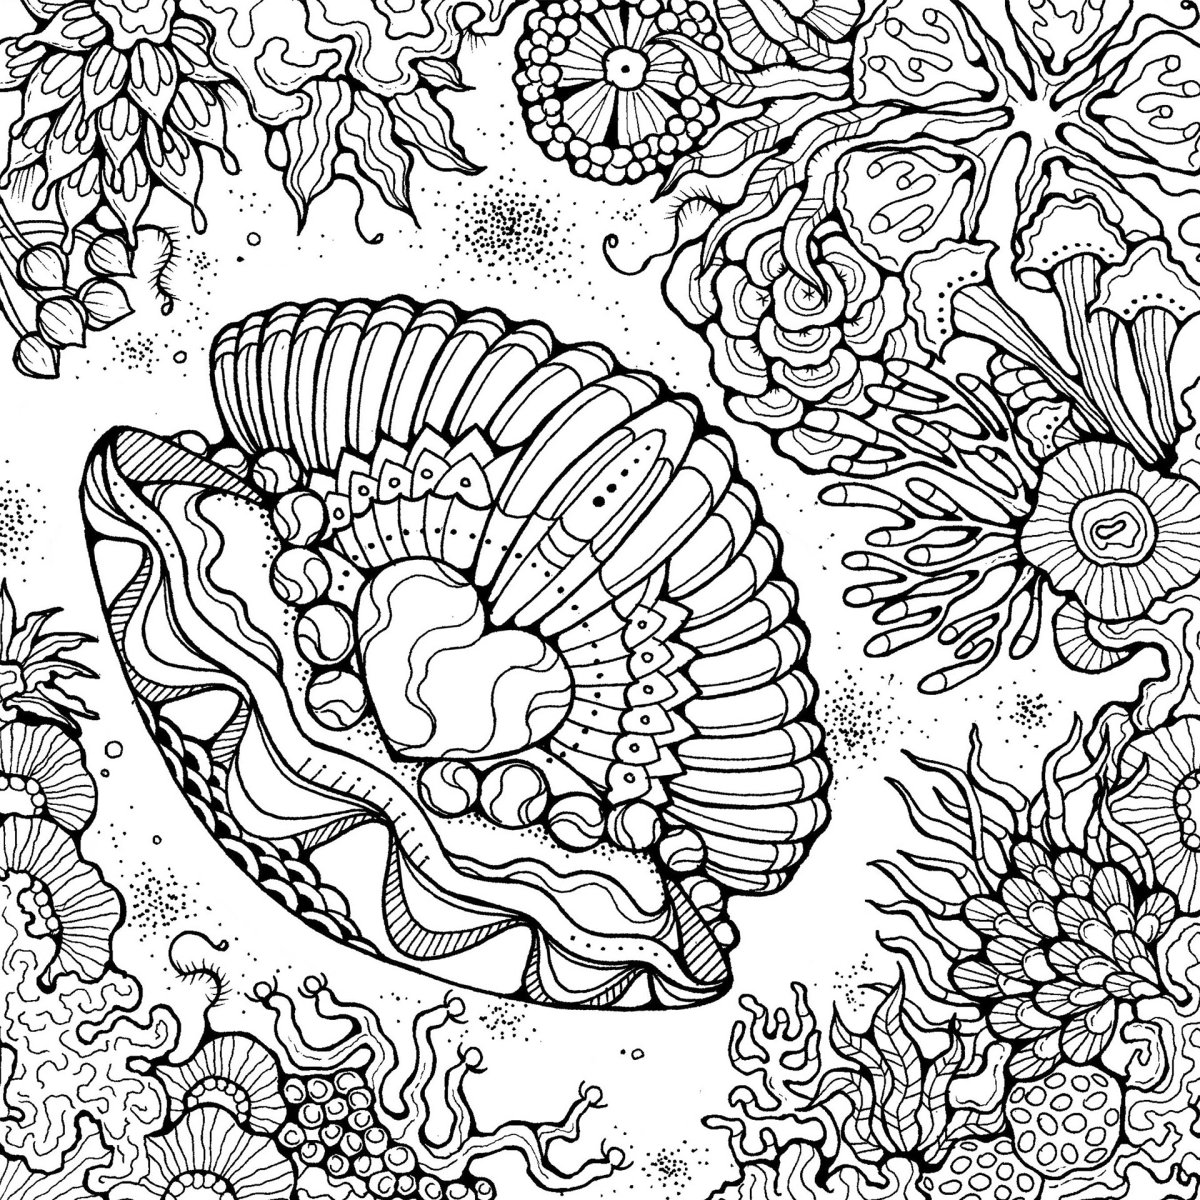 Surreal adult coloring book